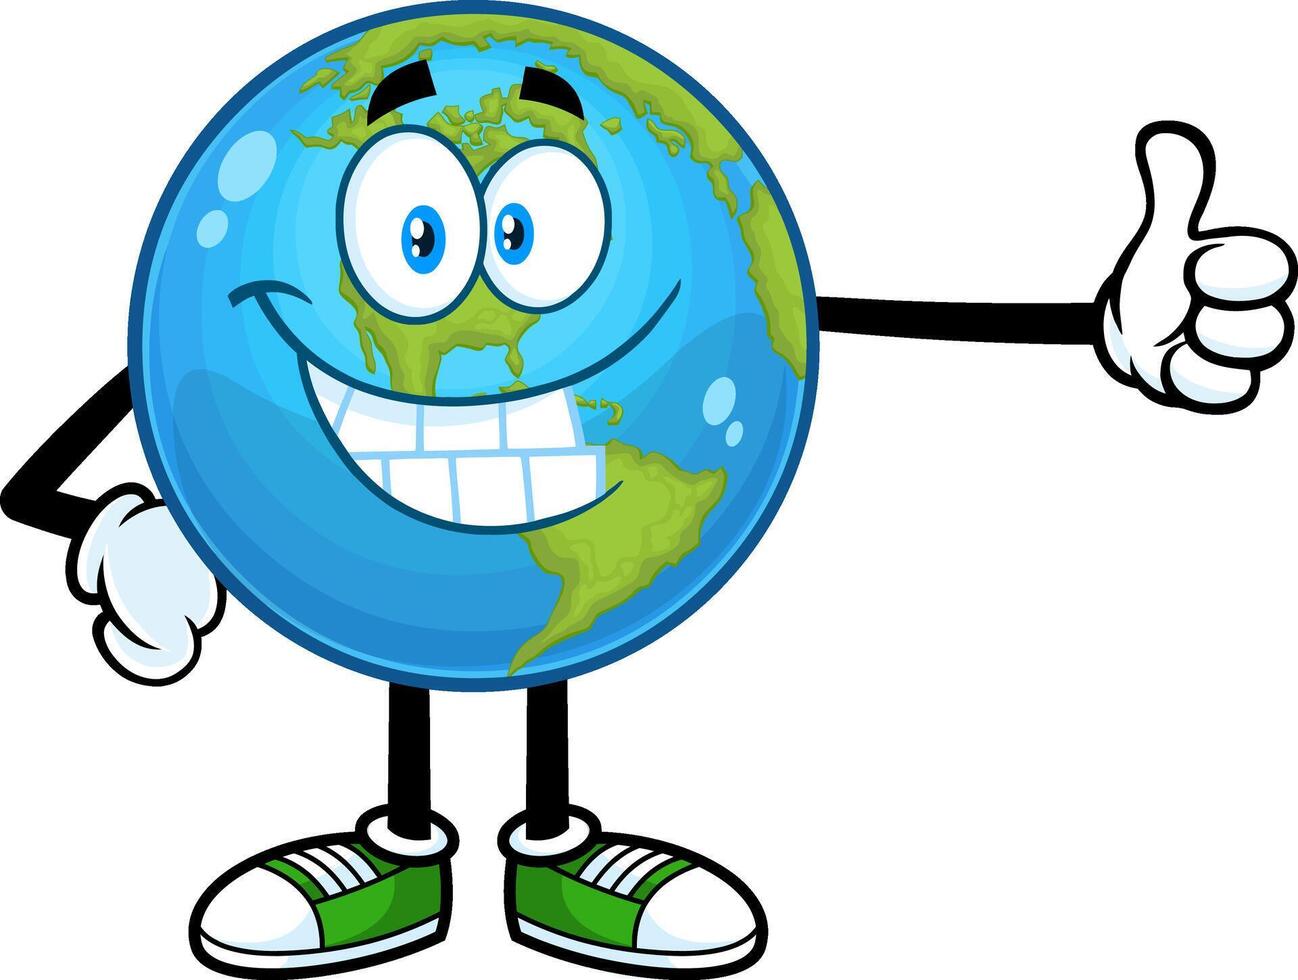 Smiling Earth Globe Cartoon Character Showing Thumbs Up. Vector Hand Drawn Illustration Isolated On Transparent Background